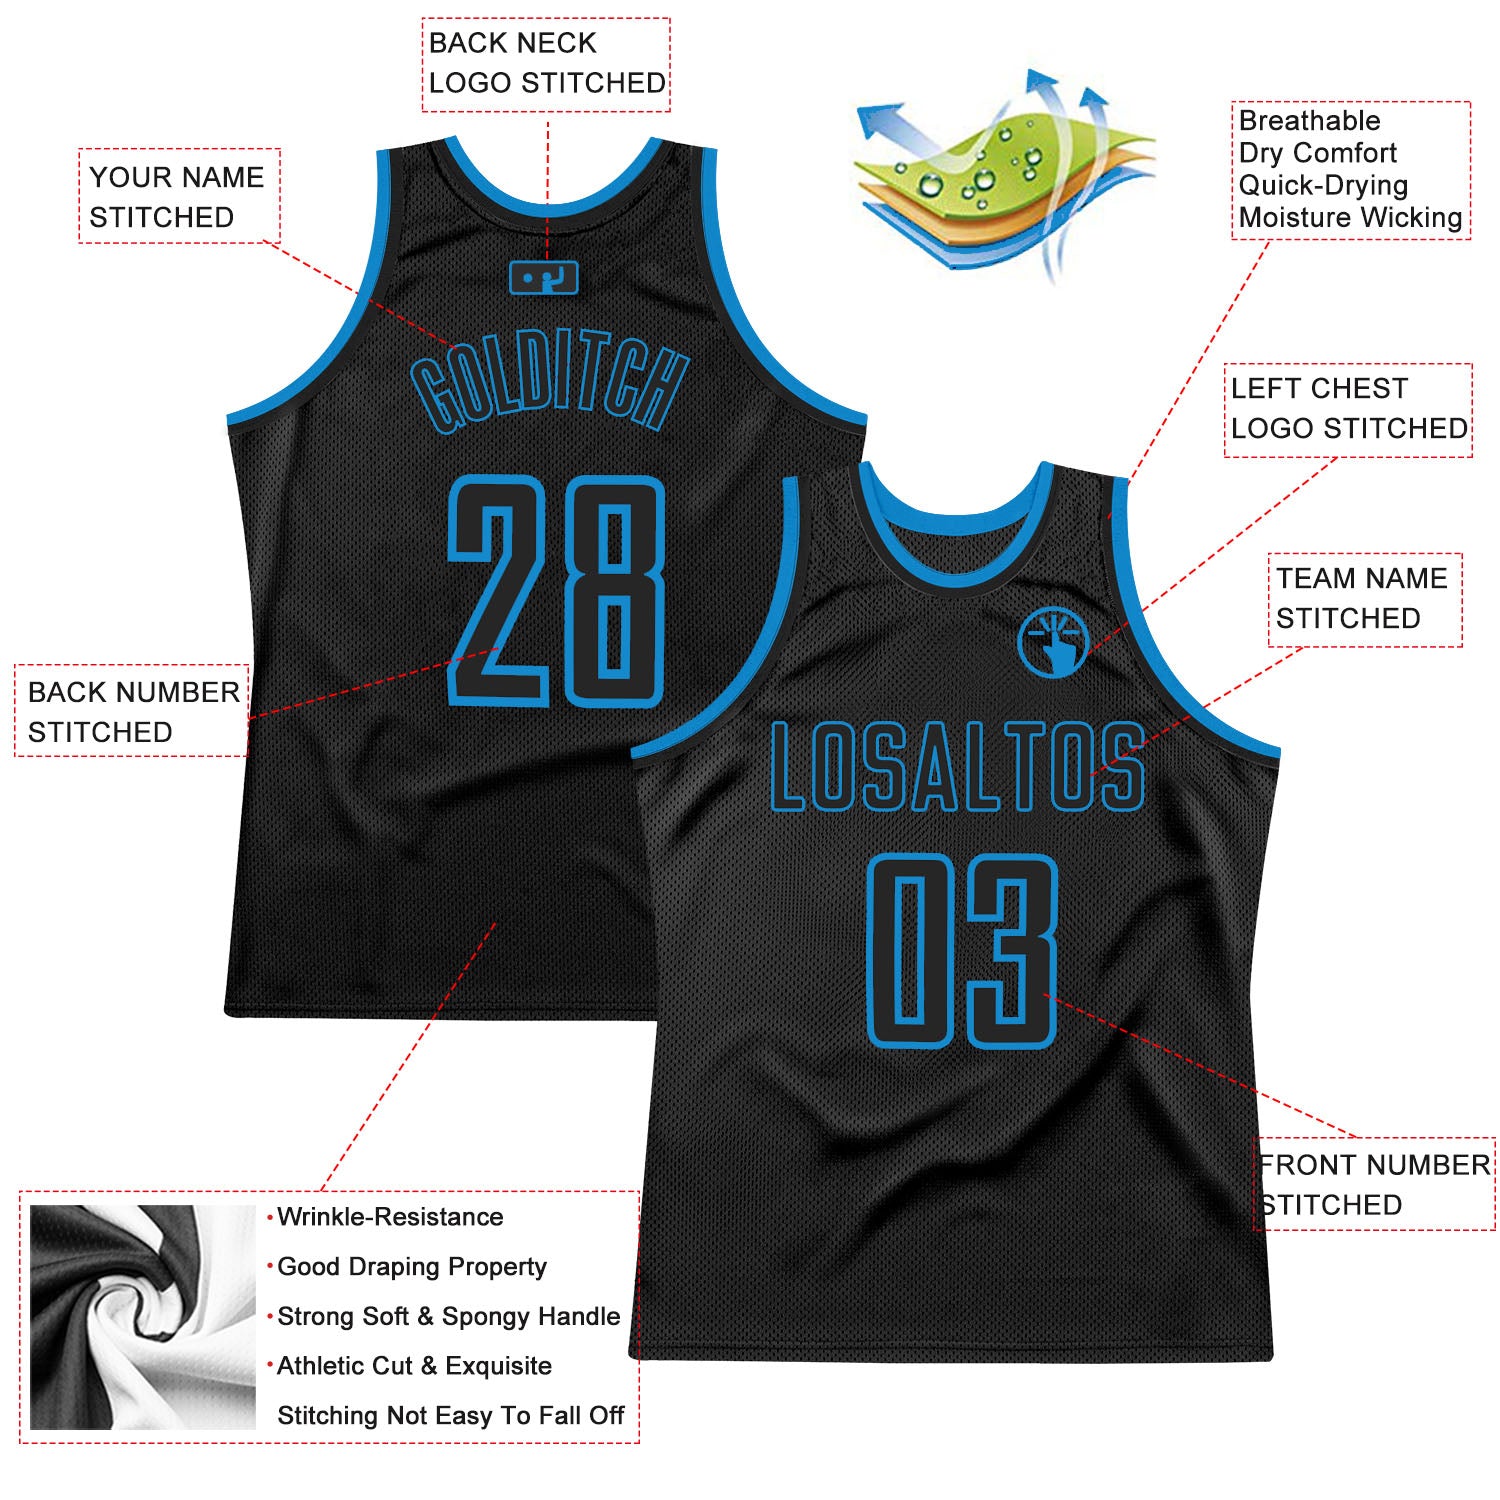 BASKETBALL BATCH 2009 01JERSEY FREE CUSTOMIZE OF NAME AND NUMBER